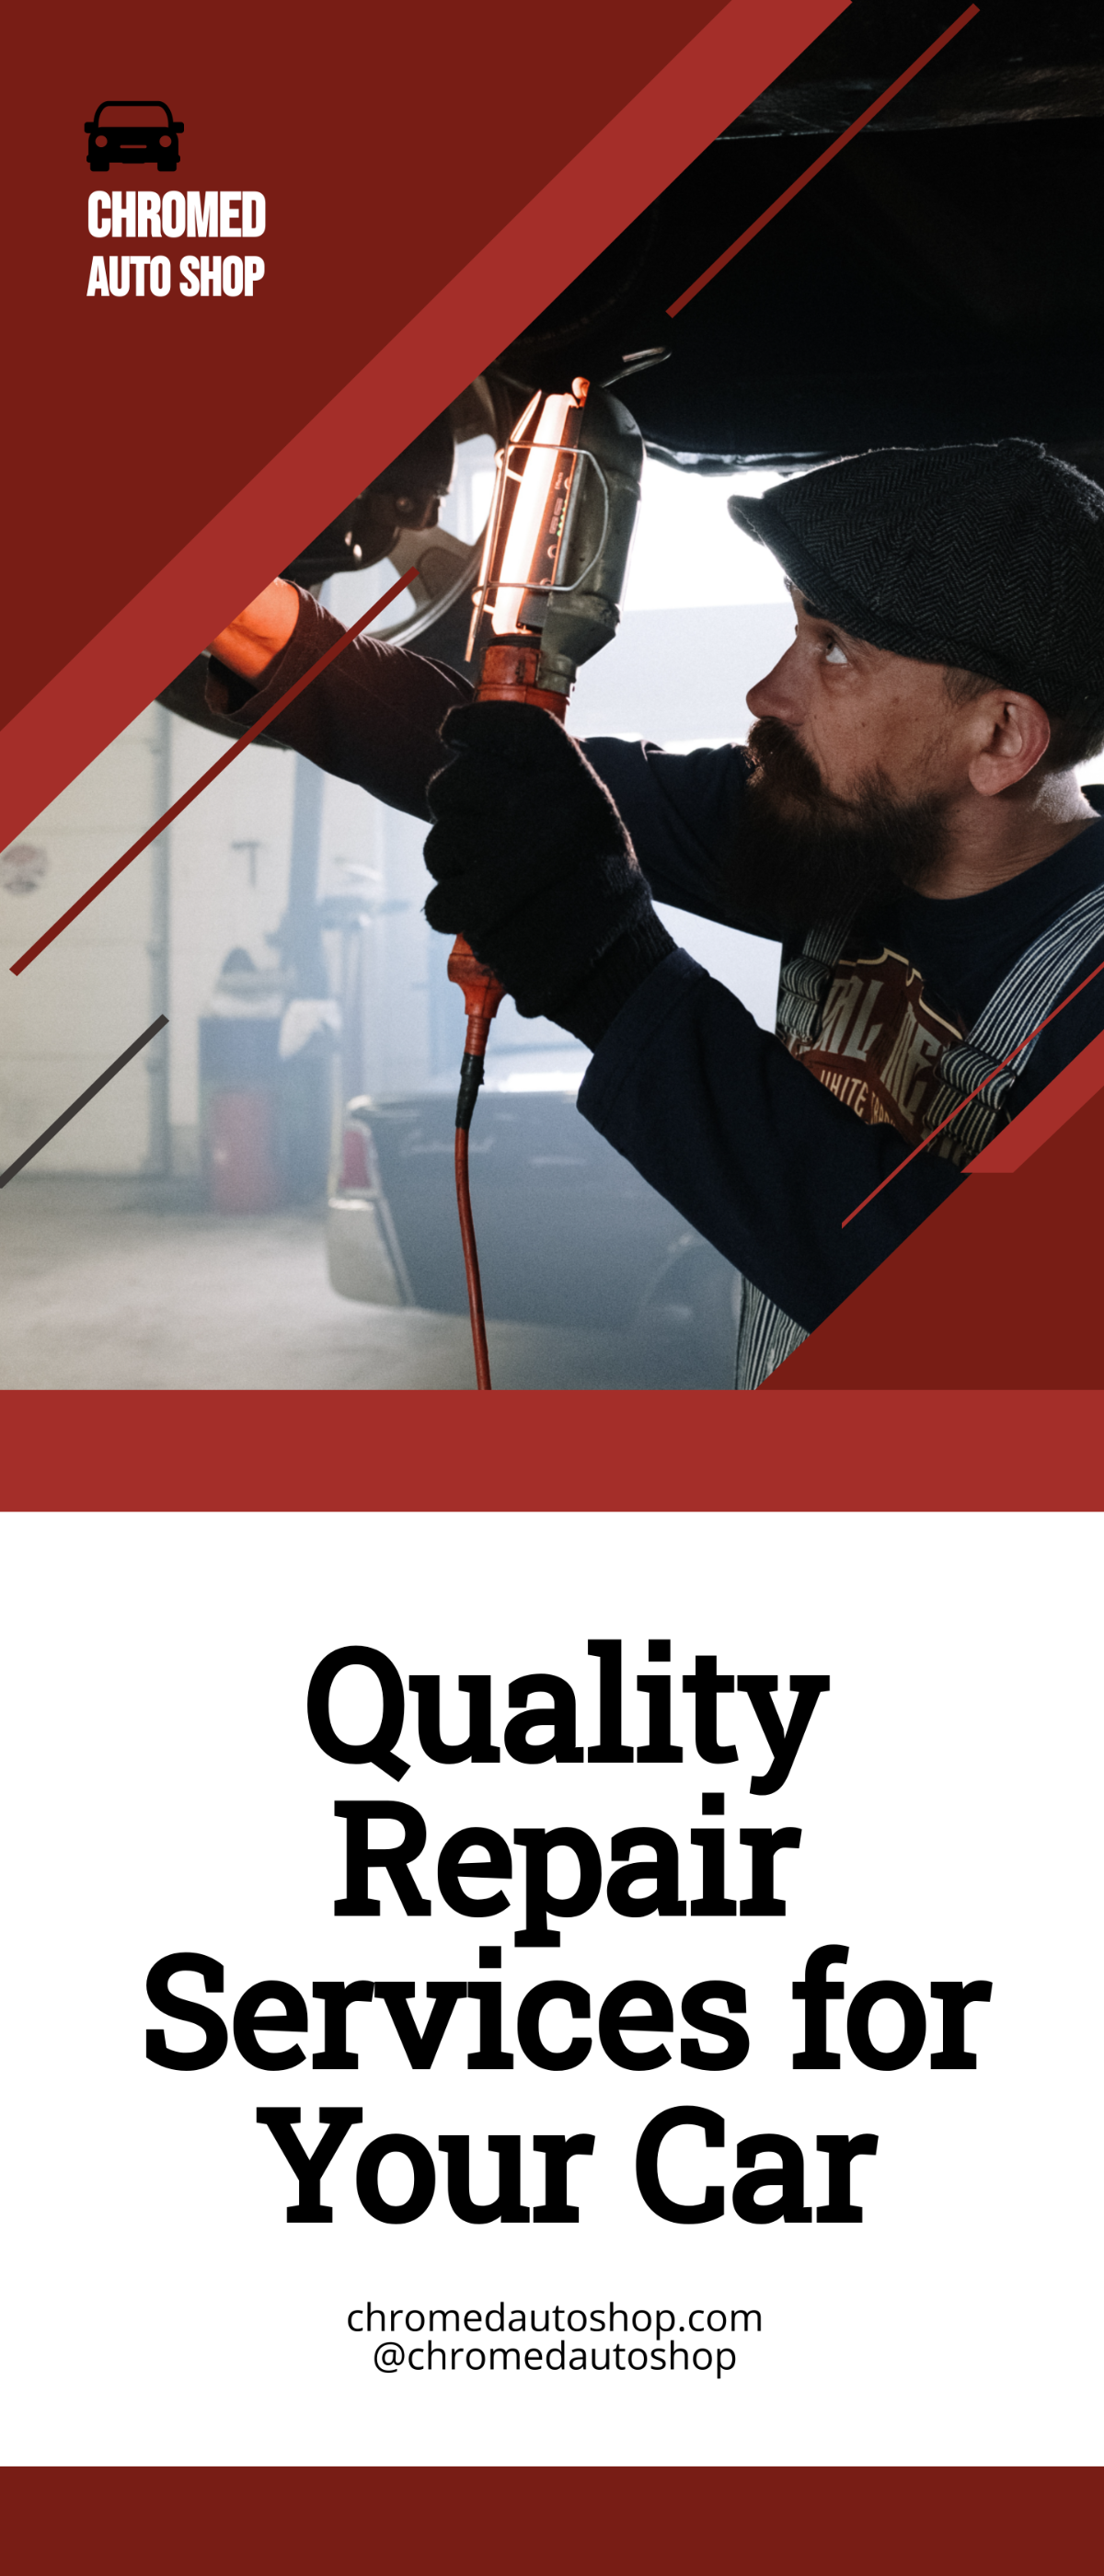 Free Car Auto Repair Service Roll-Up Banner Template